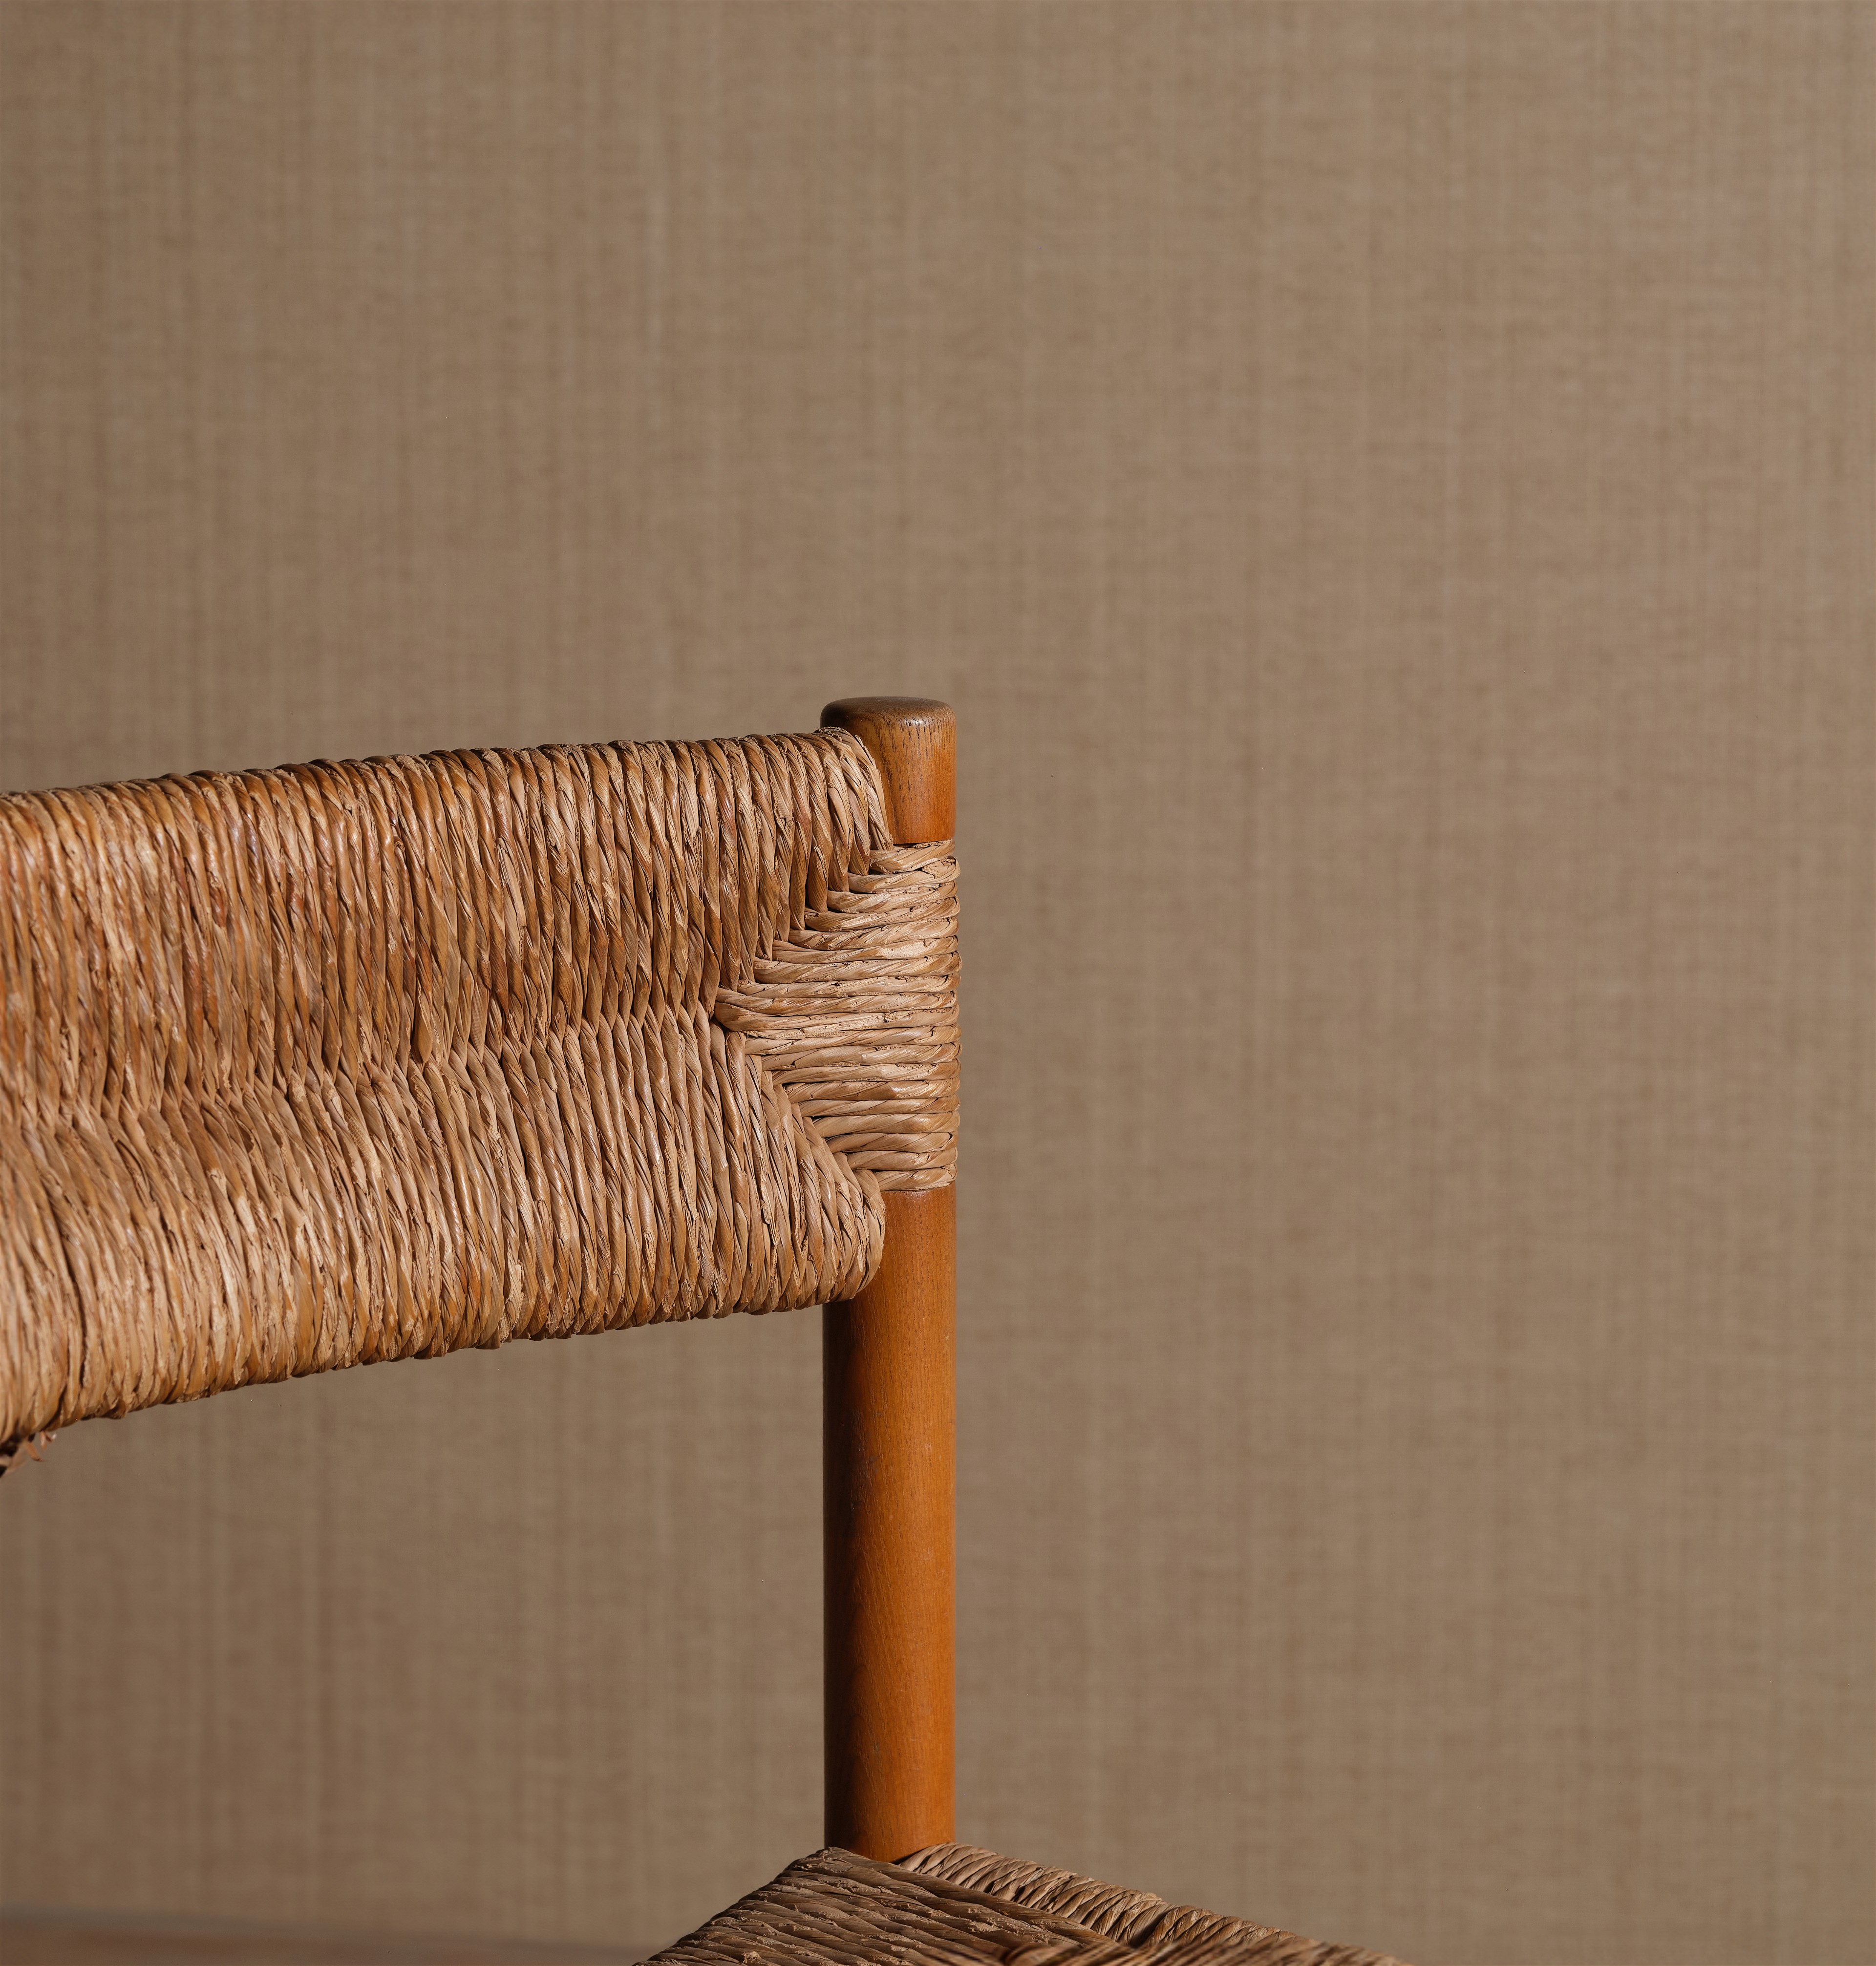 a close up of a chair with a wooden frame